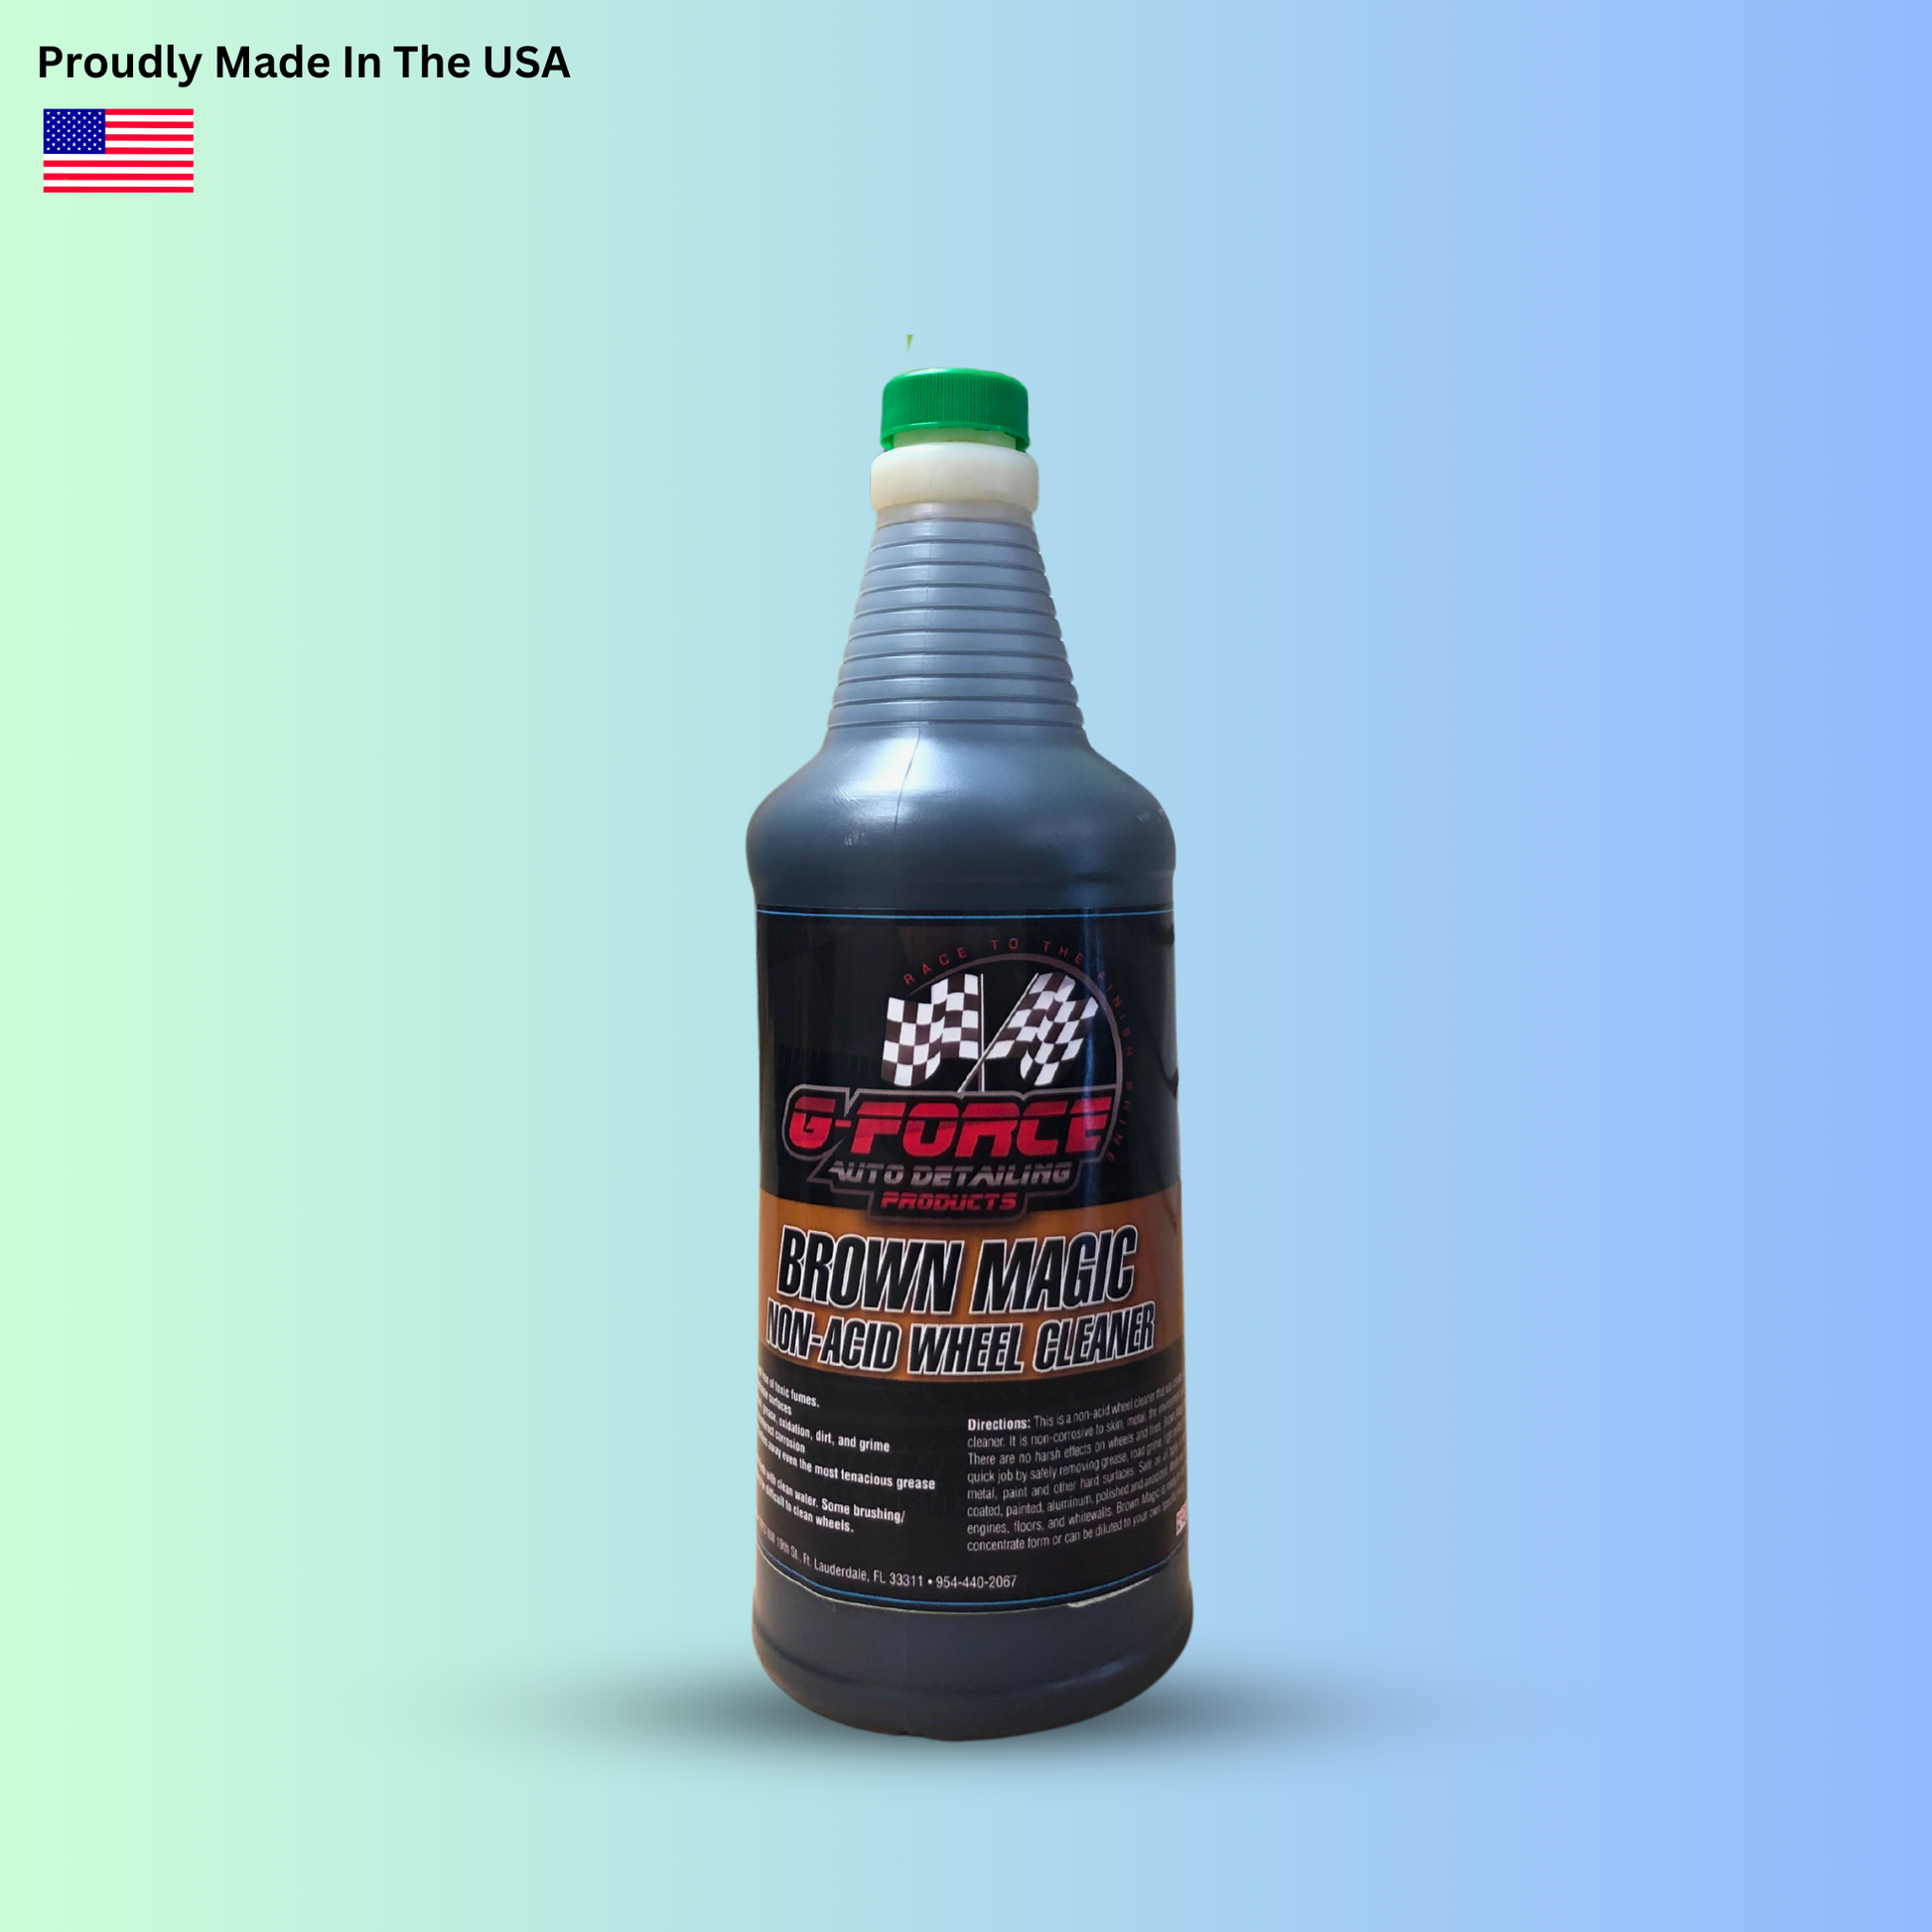 TIRE CLEANER. Professional Detailing Products, Because Your Car is